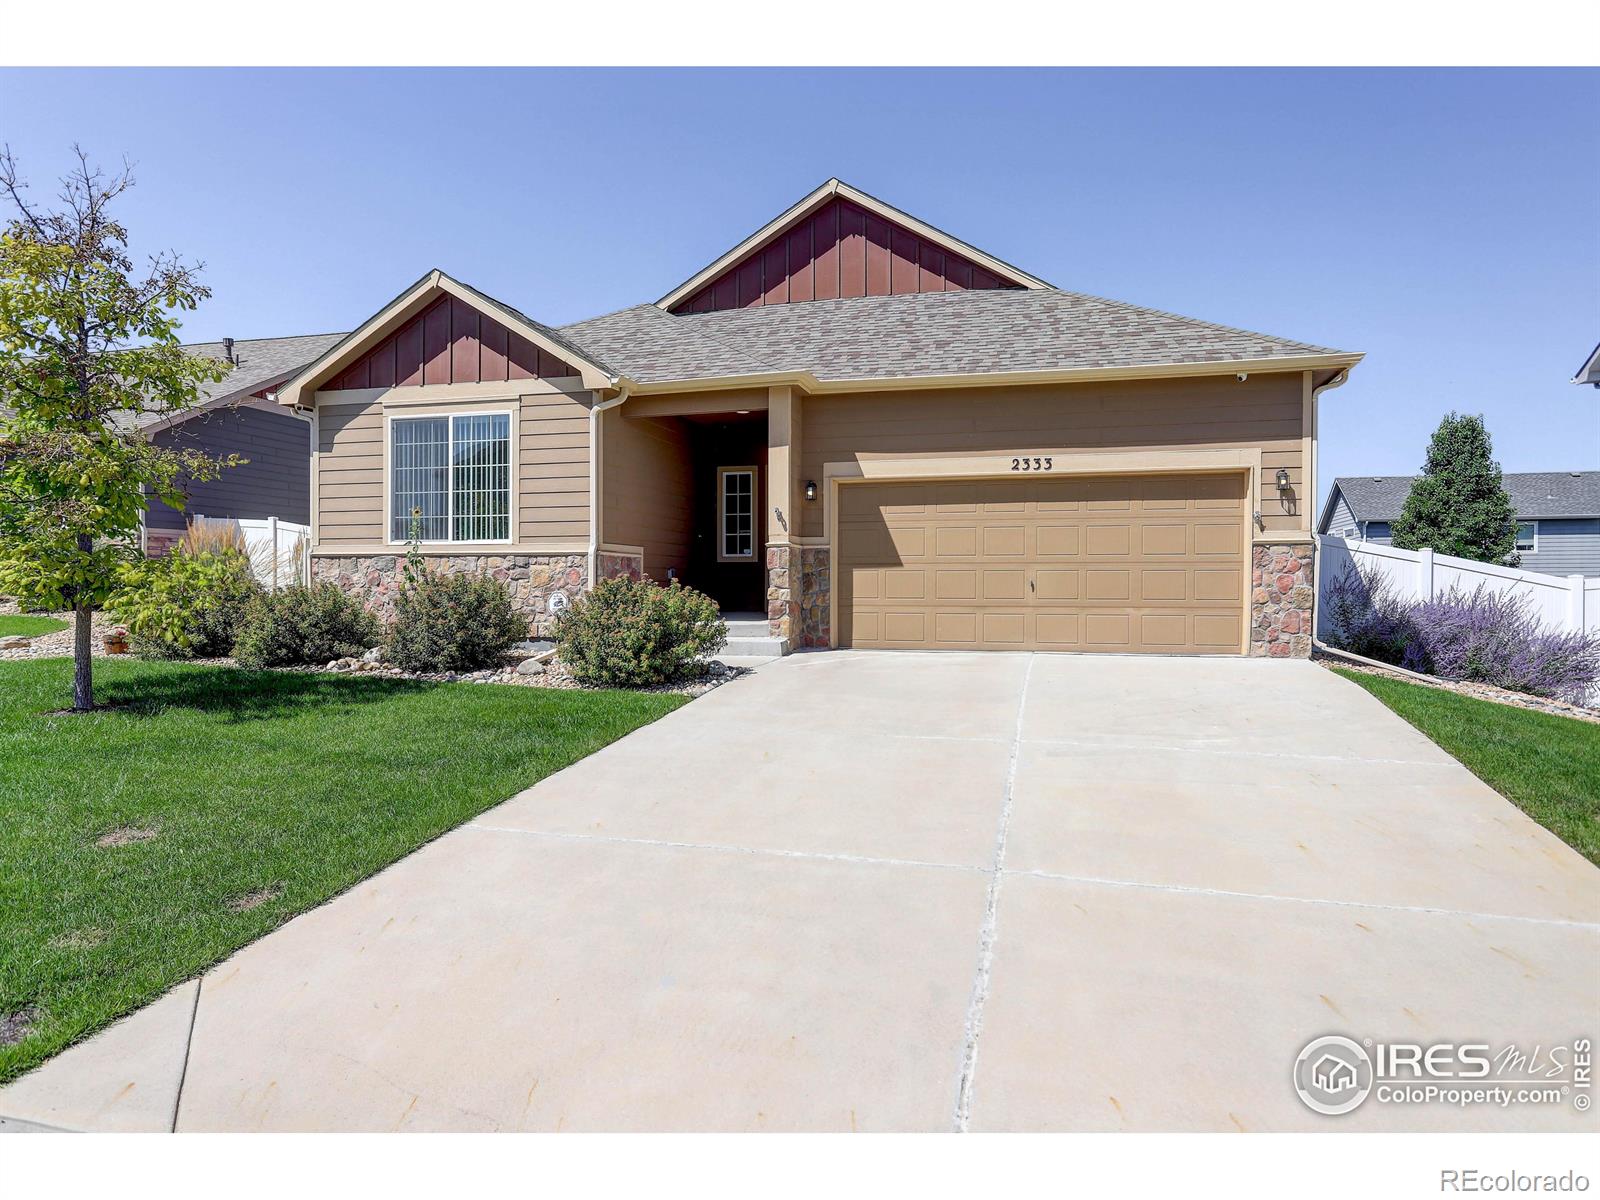 Report Image for 2333  76th Ave Ct,Greeley, Colorado